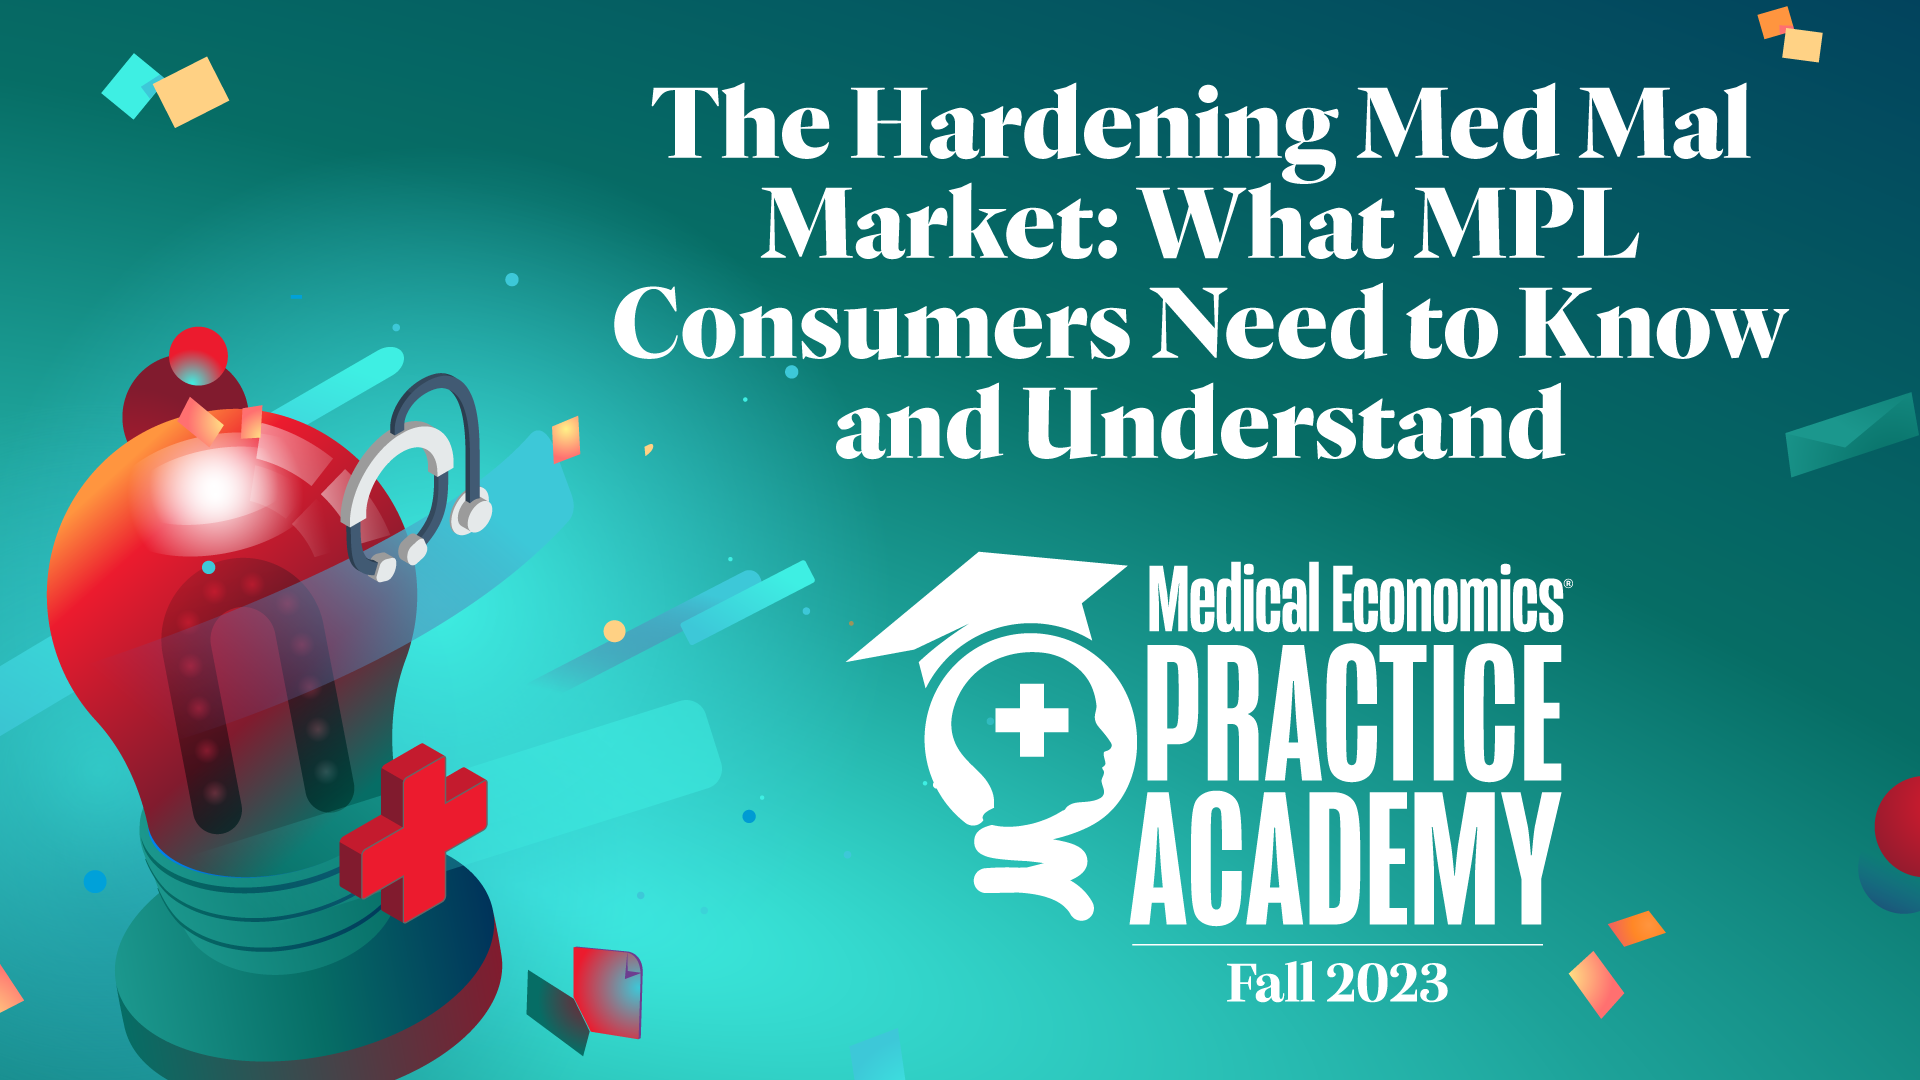 The Medical Malpractice Market: What MPL Consumers Need to Know and Understand